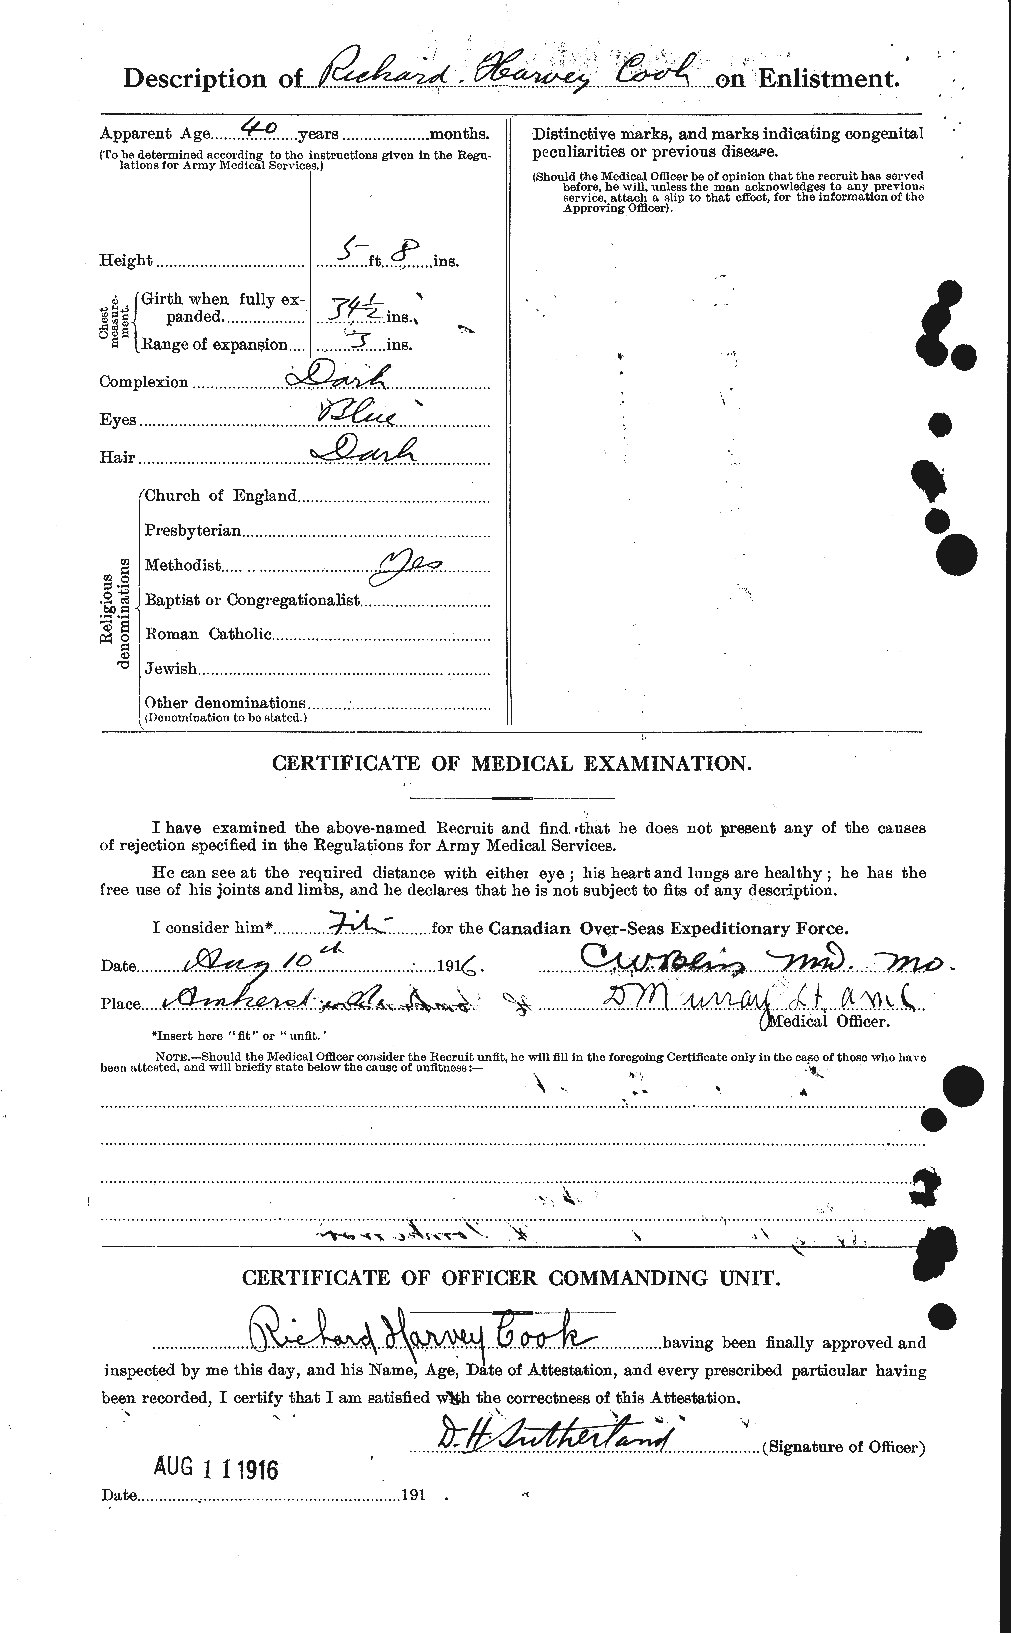 Personnel Records of the First World War - CEF 075180b